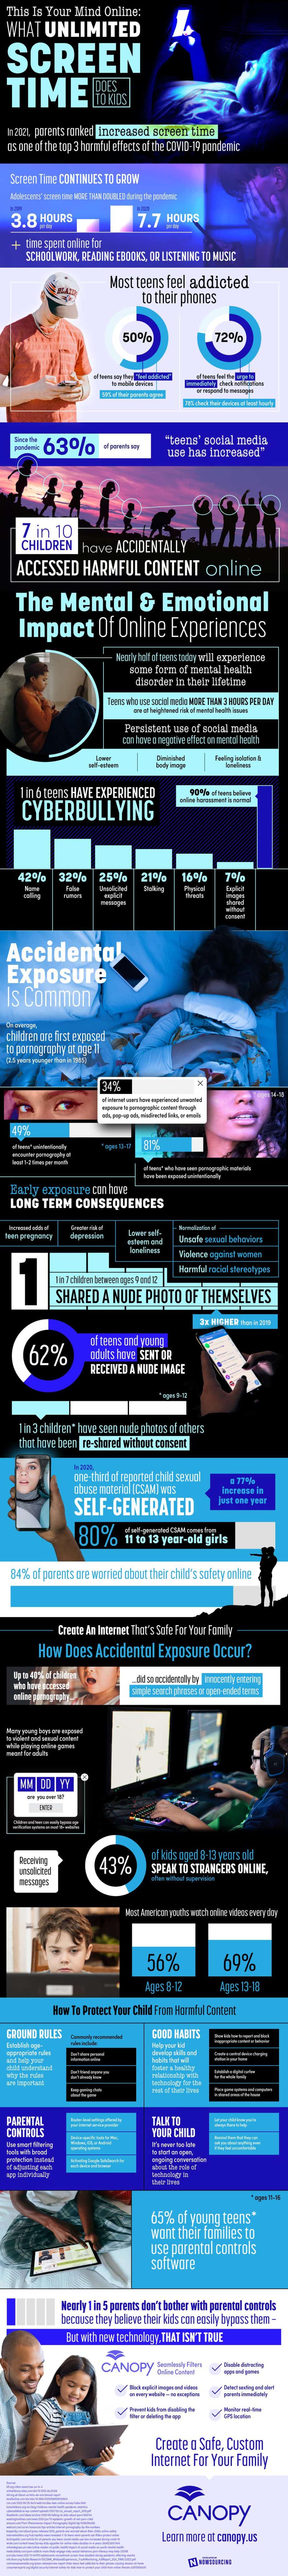 What Unlimited Screen Time Does To Kids - Infographic